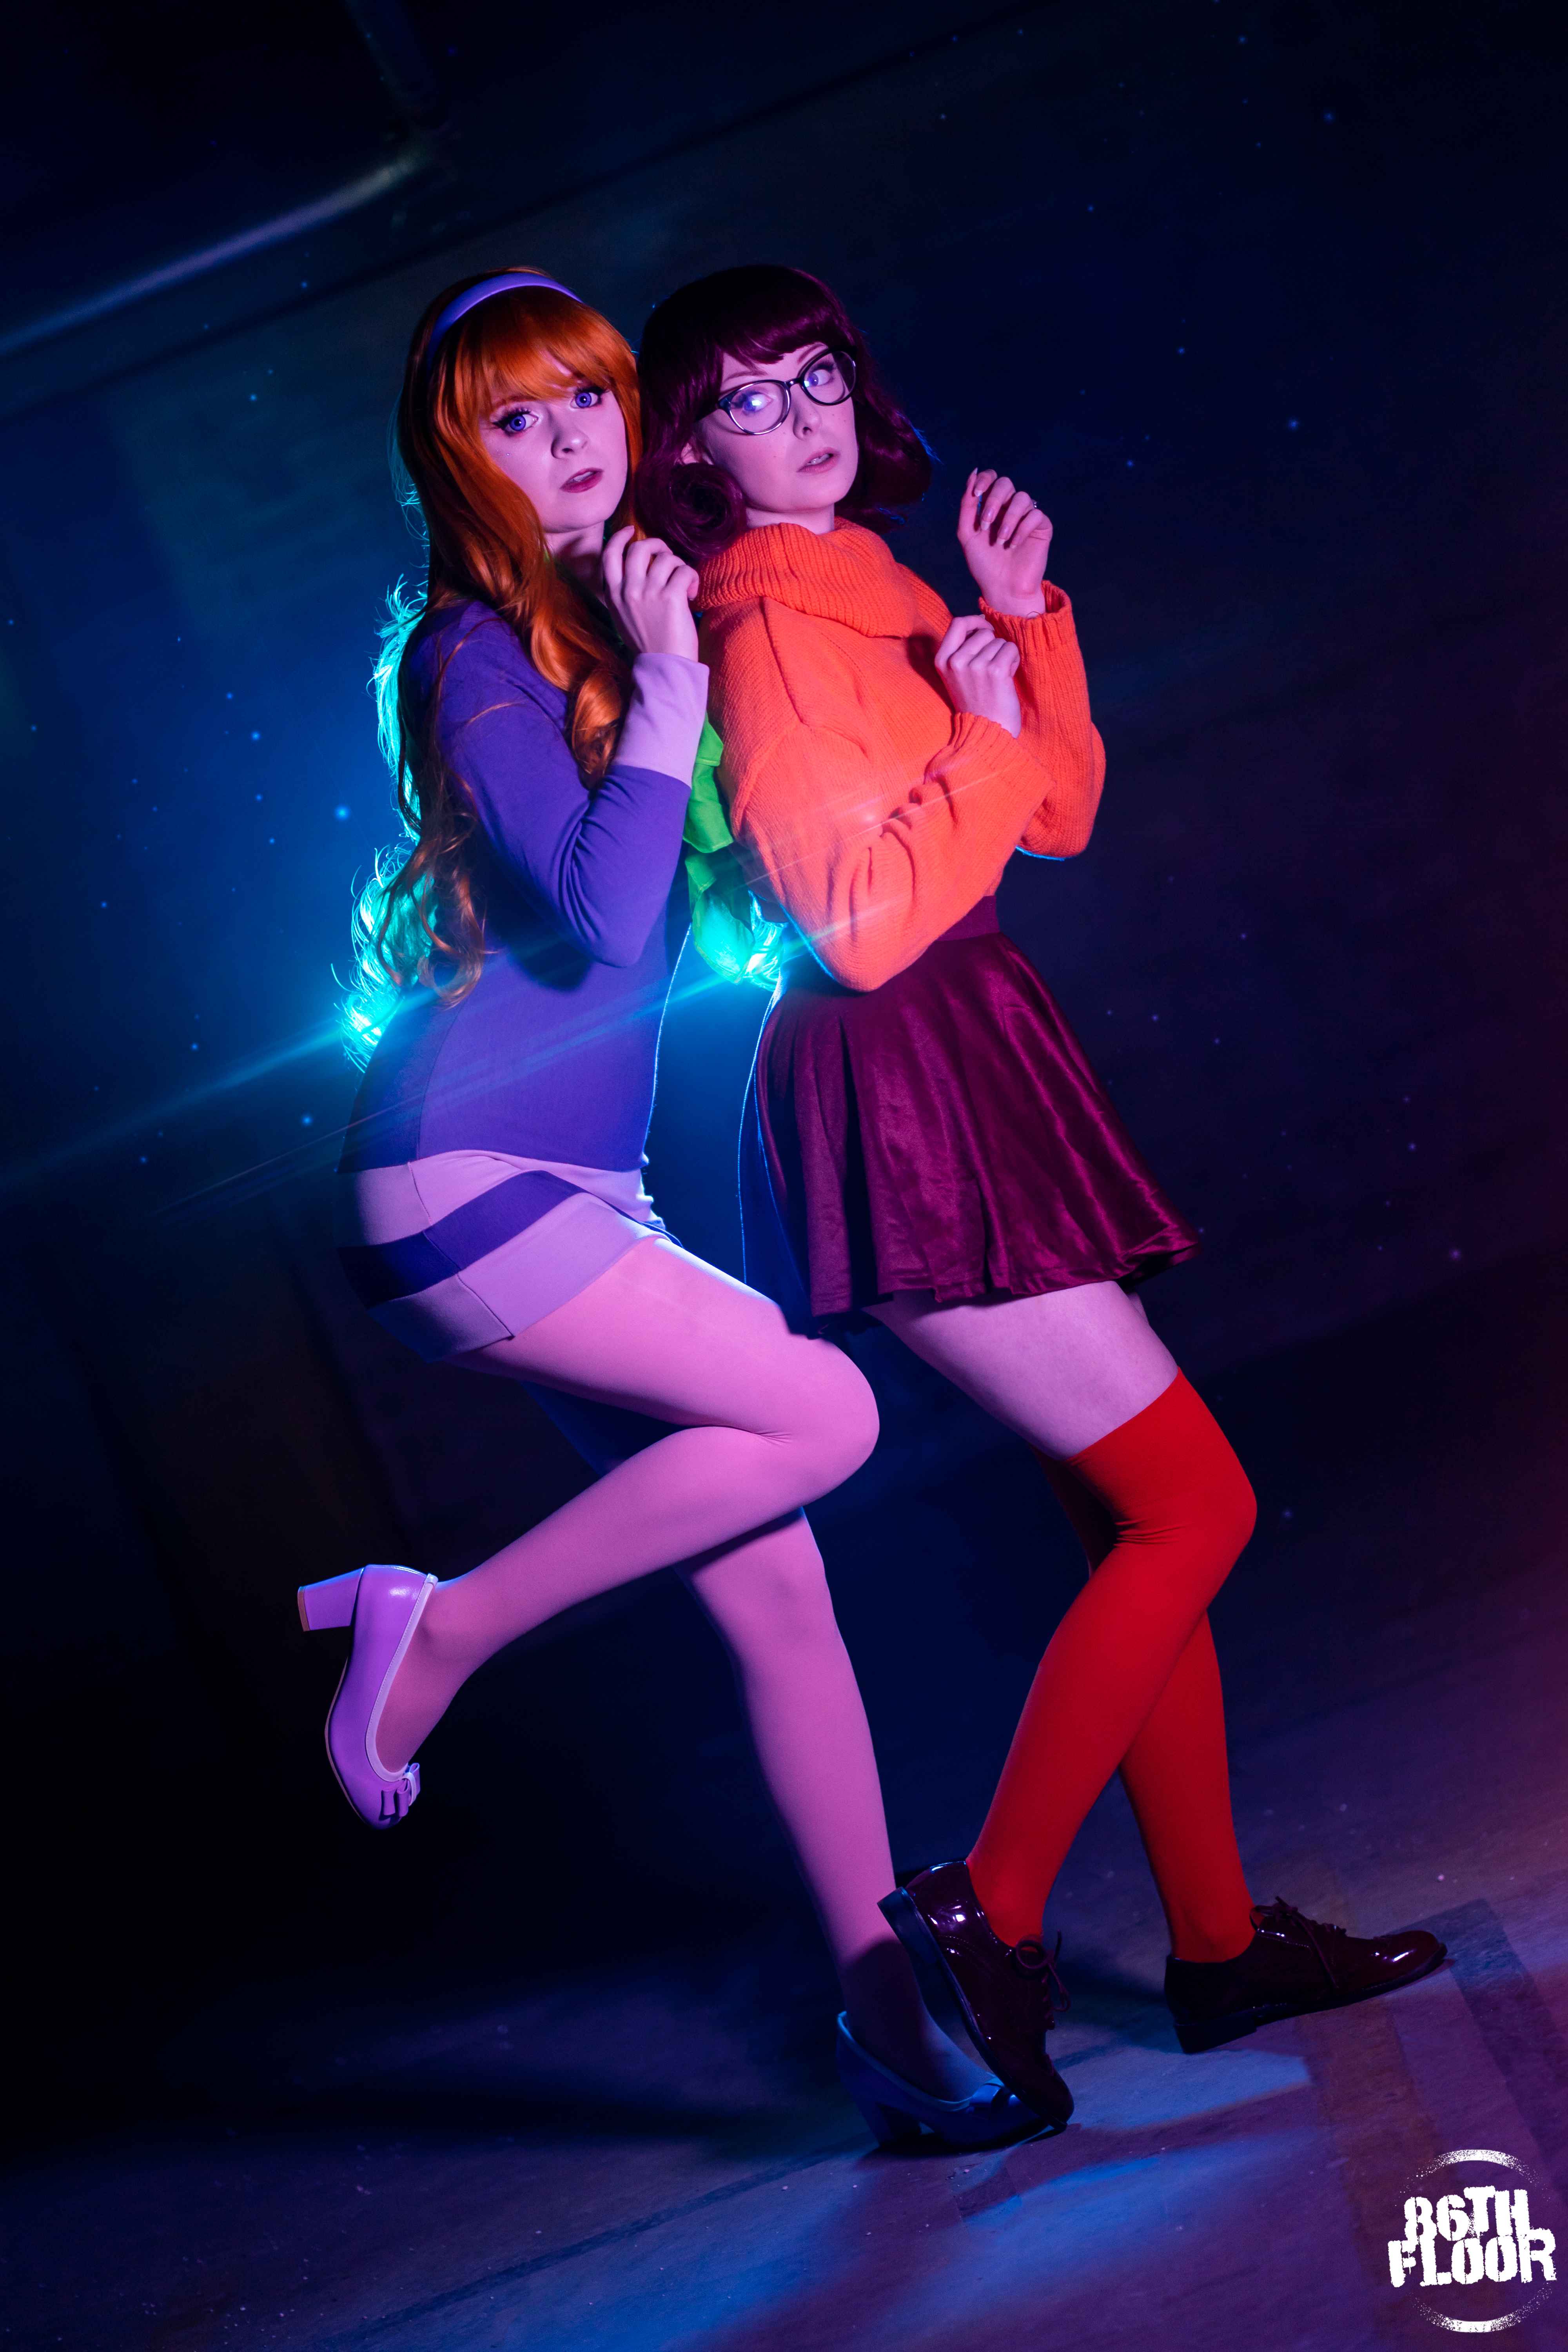 Daphne and Velma cosplayers from Scooby Doo